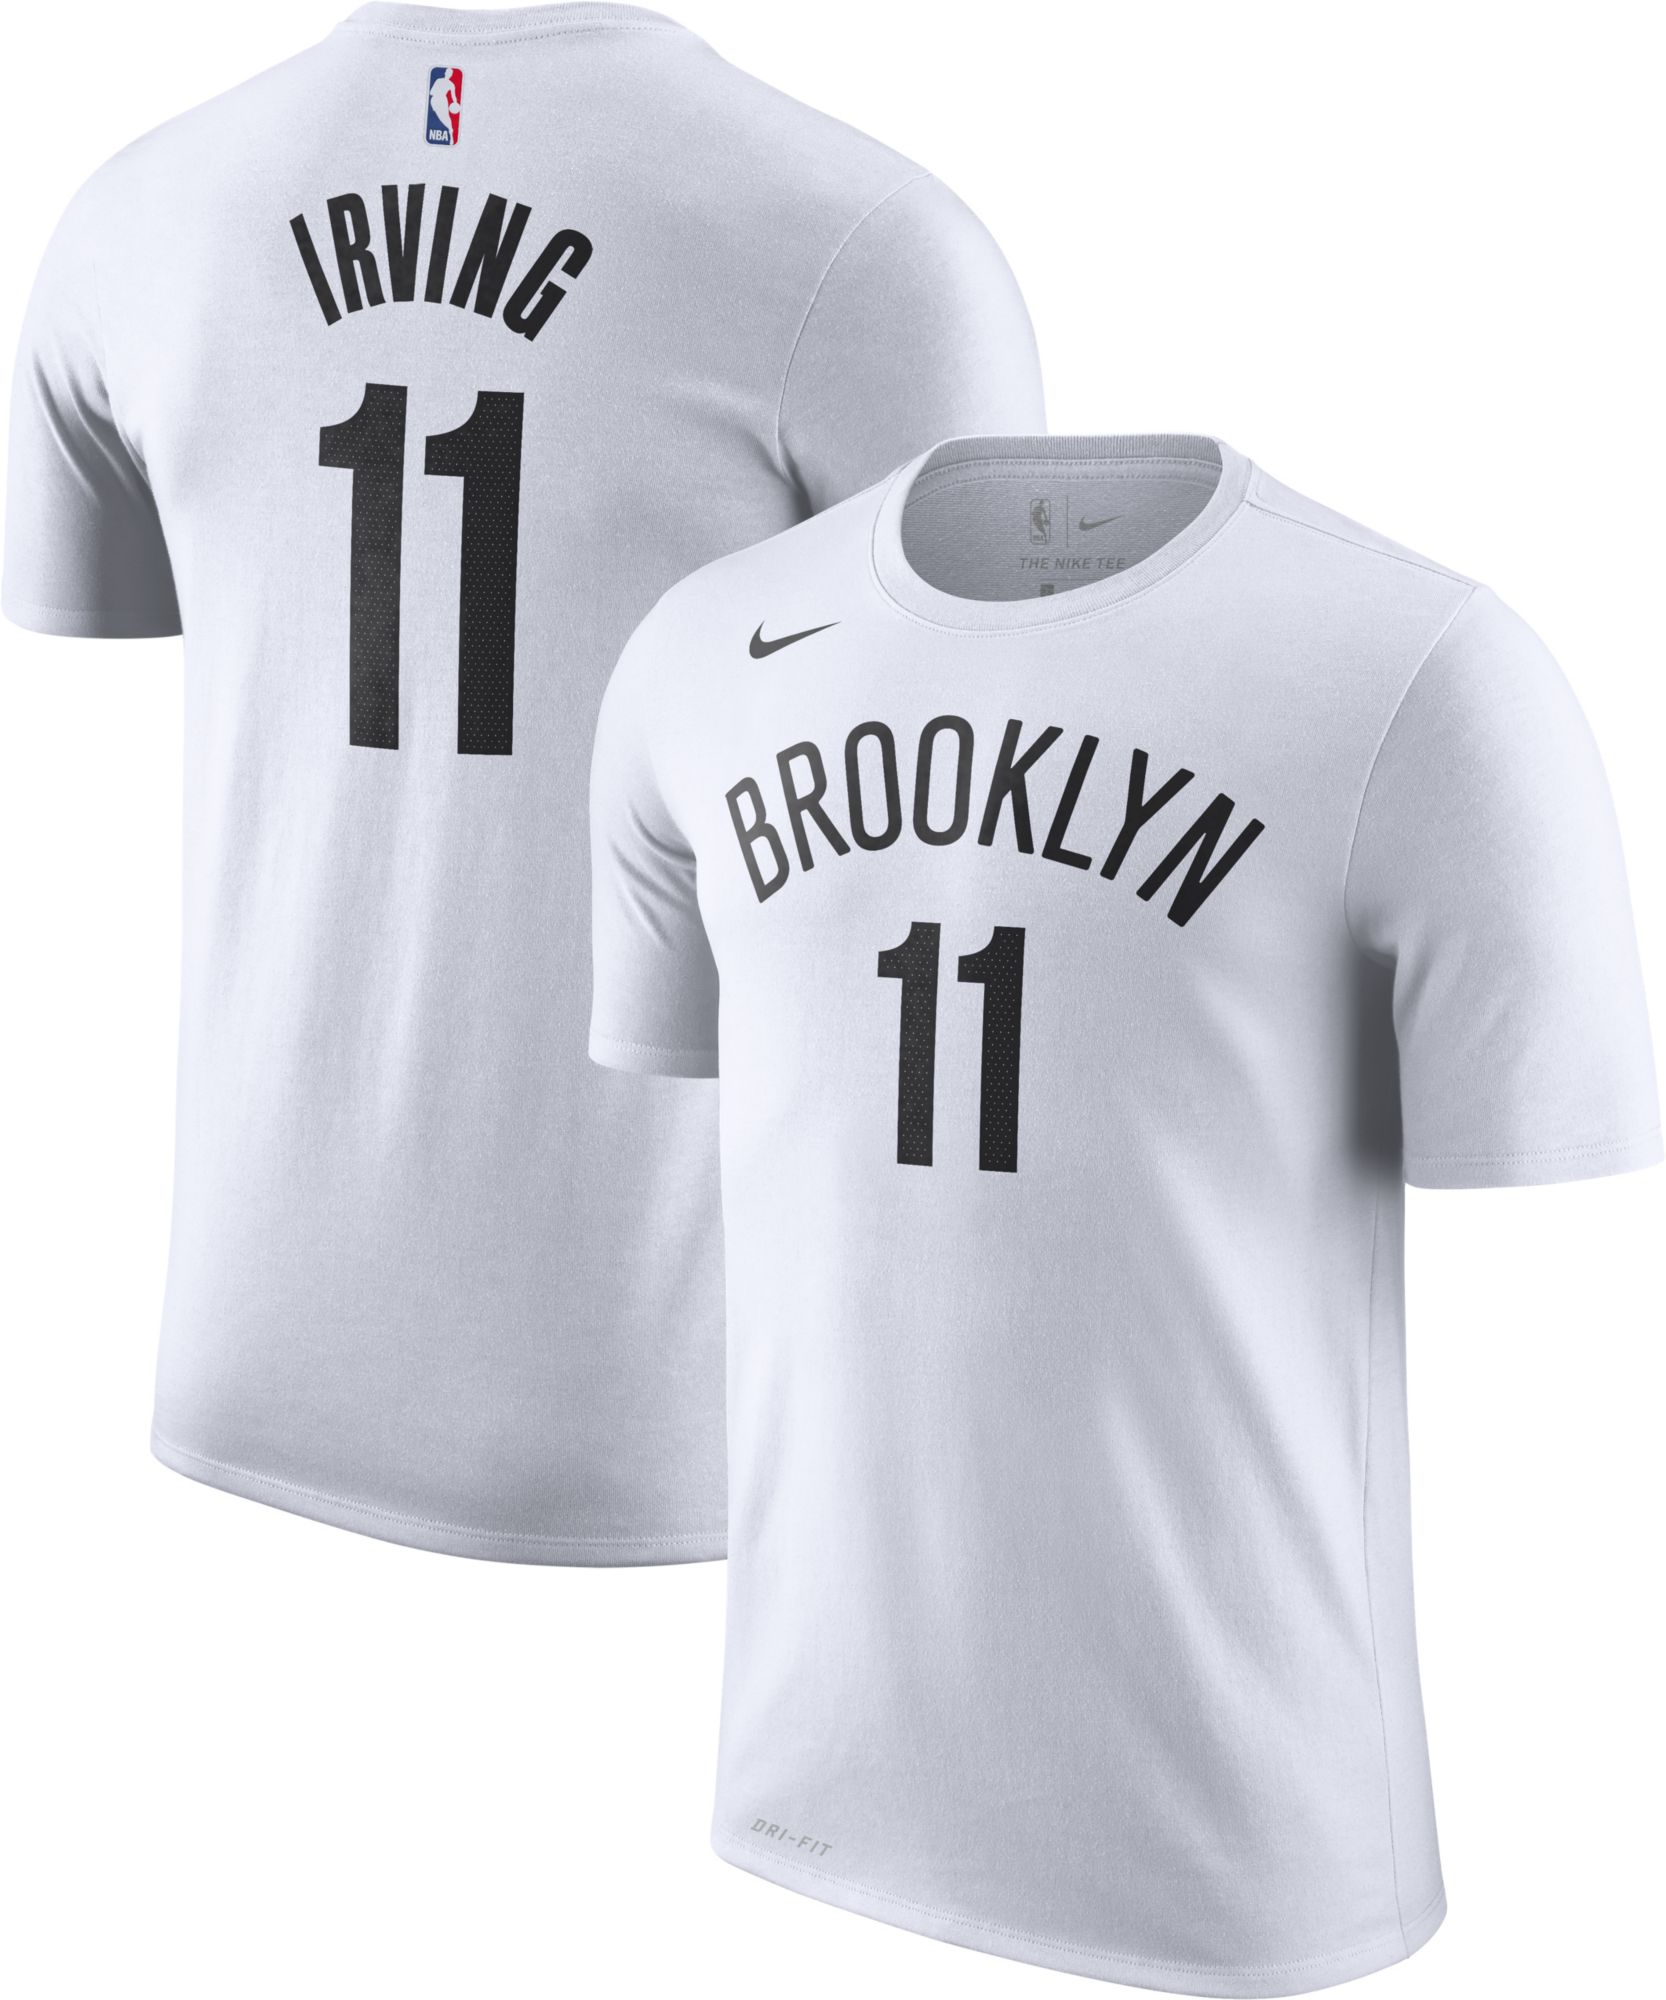 kyrie irving t shirt youth